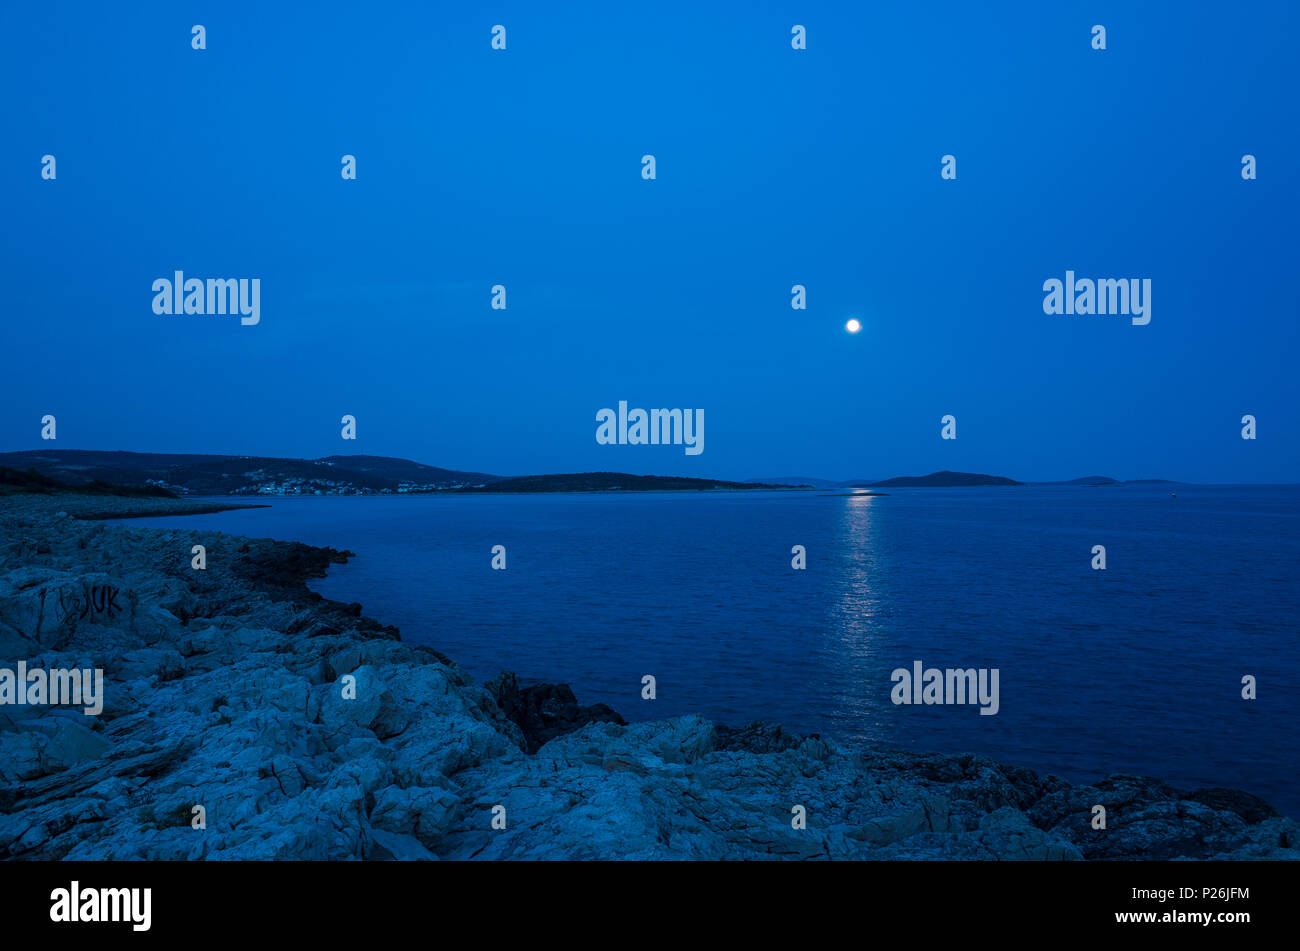 Beautiful night photo of Adriatic Sea in Croatia. Nice blue colors and moon in sky. Rock and stone beach. Calm, peaceful background image. Stillness a Stock Photo